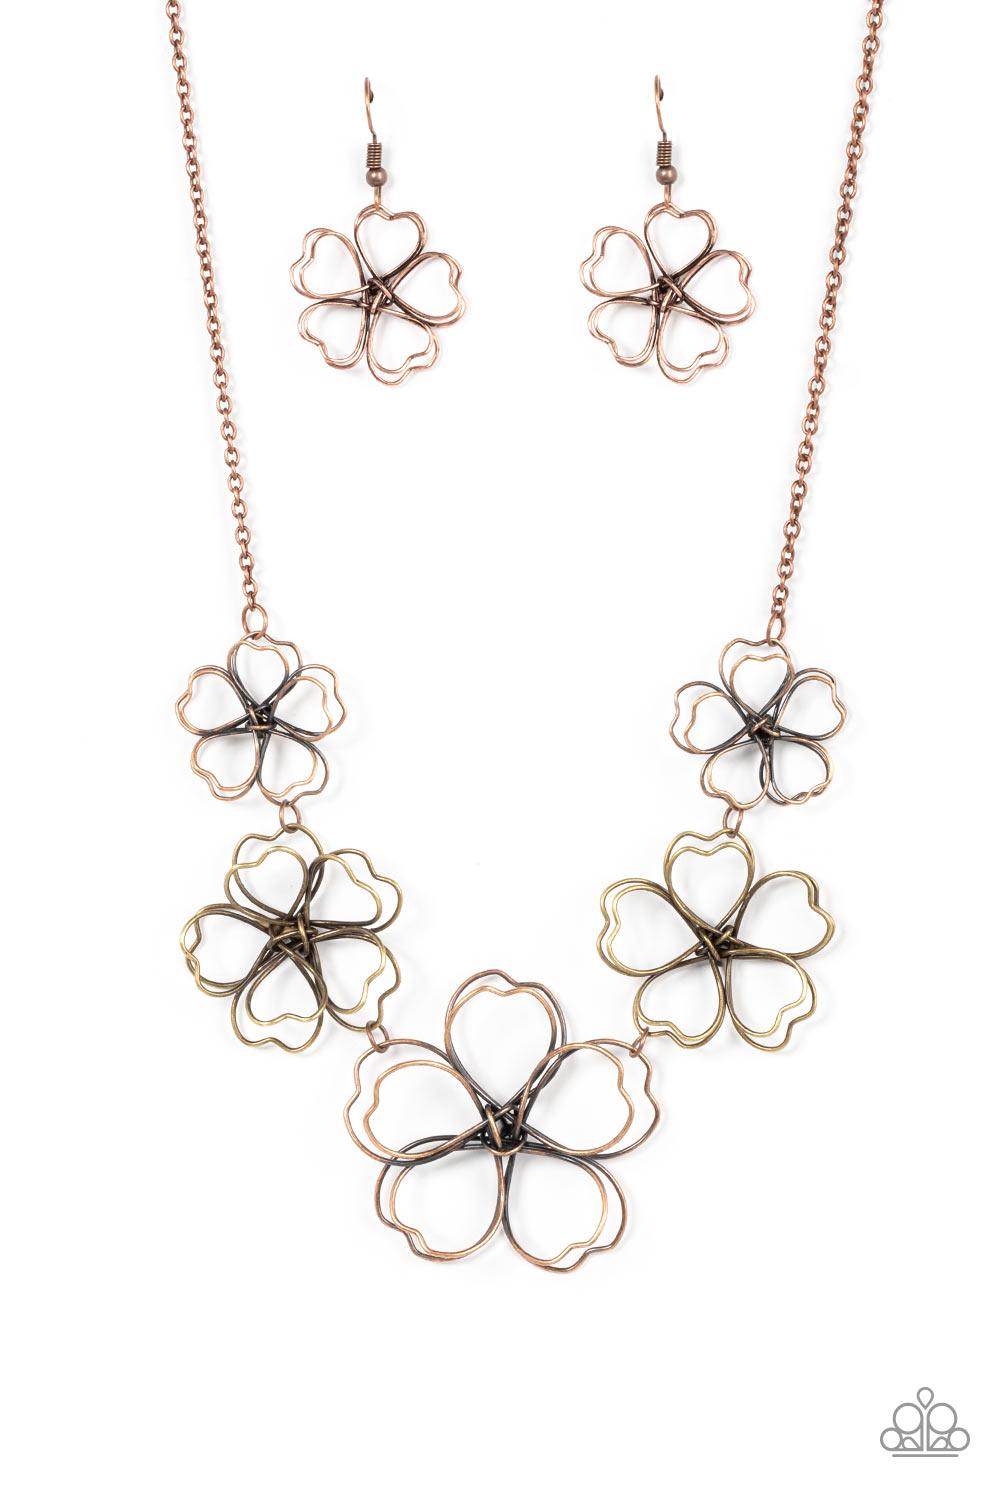 Time to GROW Copper Wire Flower Necklace- lightbox - CarasShop.com - $5 Jewelry by Cara Jewels